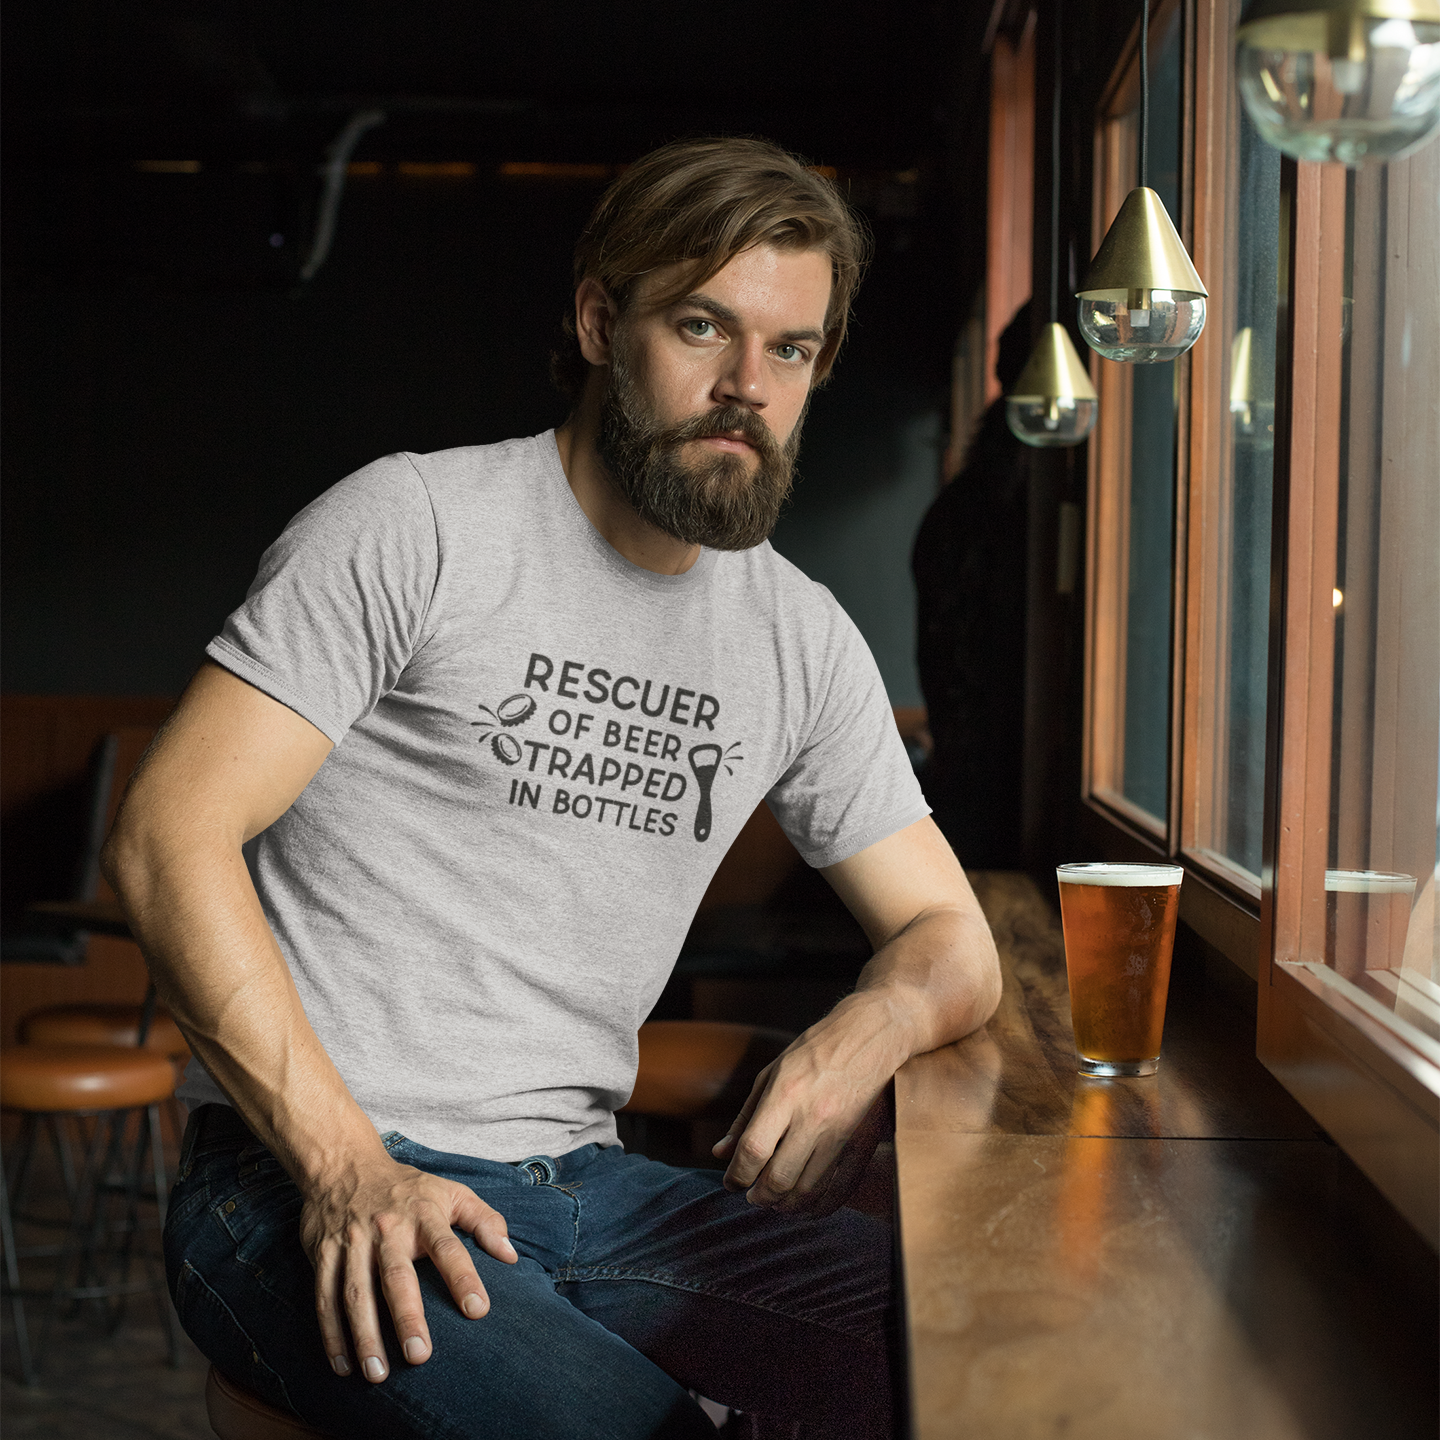 'Rescuer of beer trapped in bottles' adult shirt